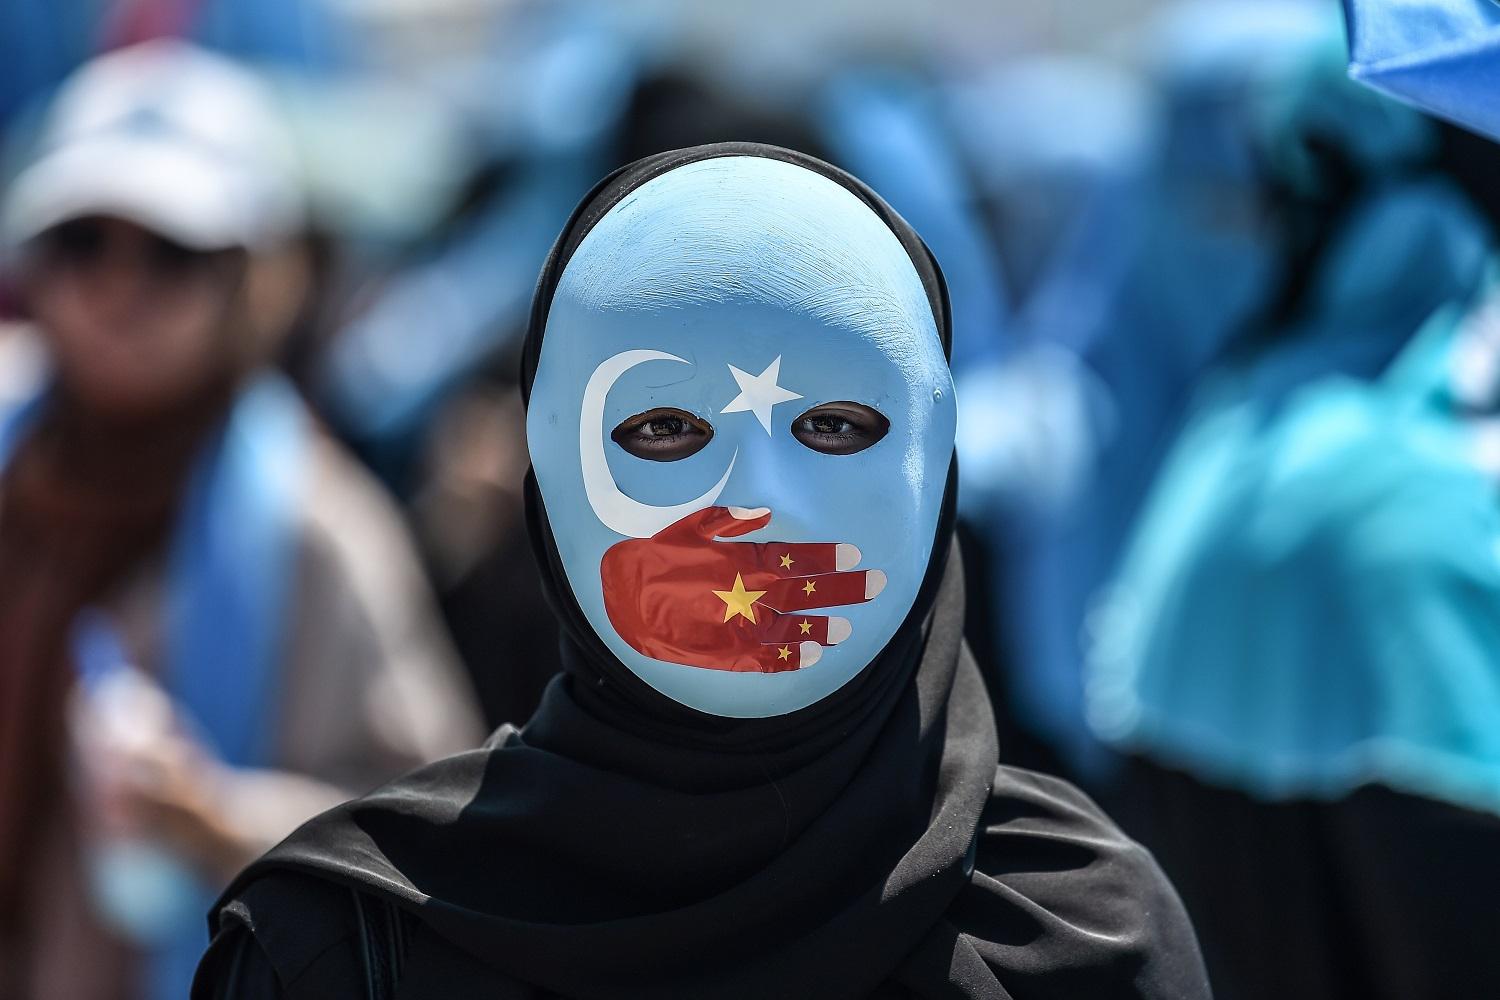 gettyimages9921744441jpgw1500h1000crop00 1 - Muslim children forced to drop 'religious' names in western China